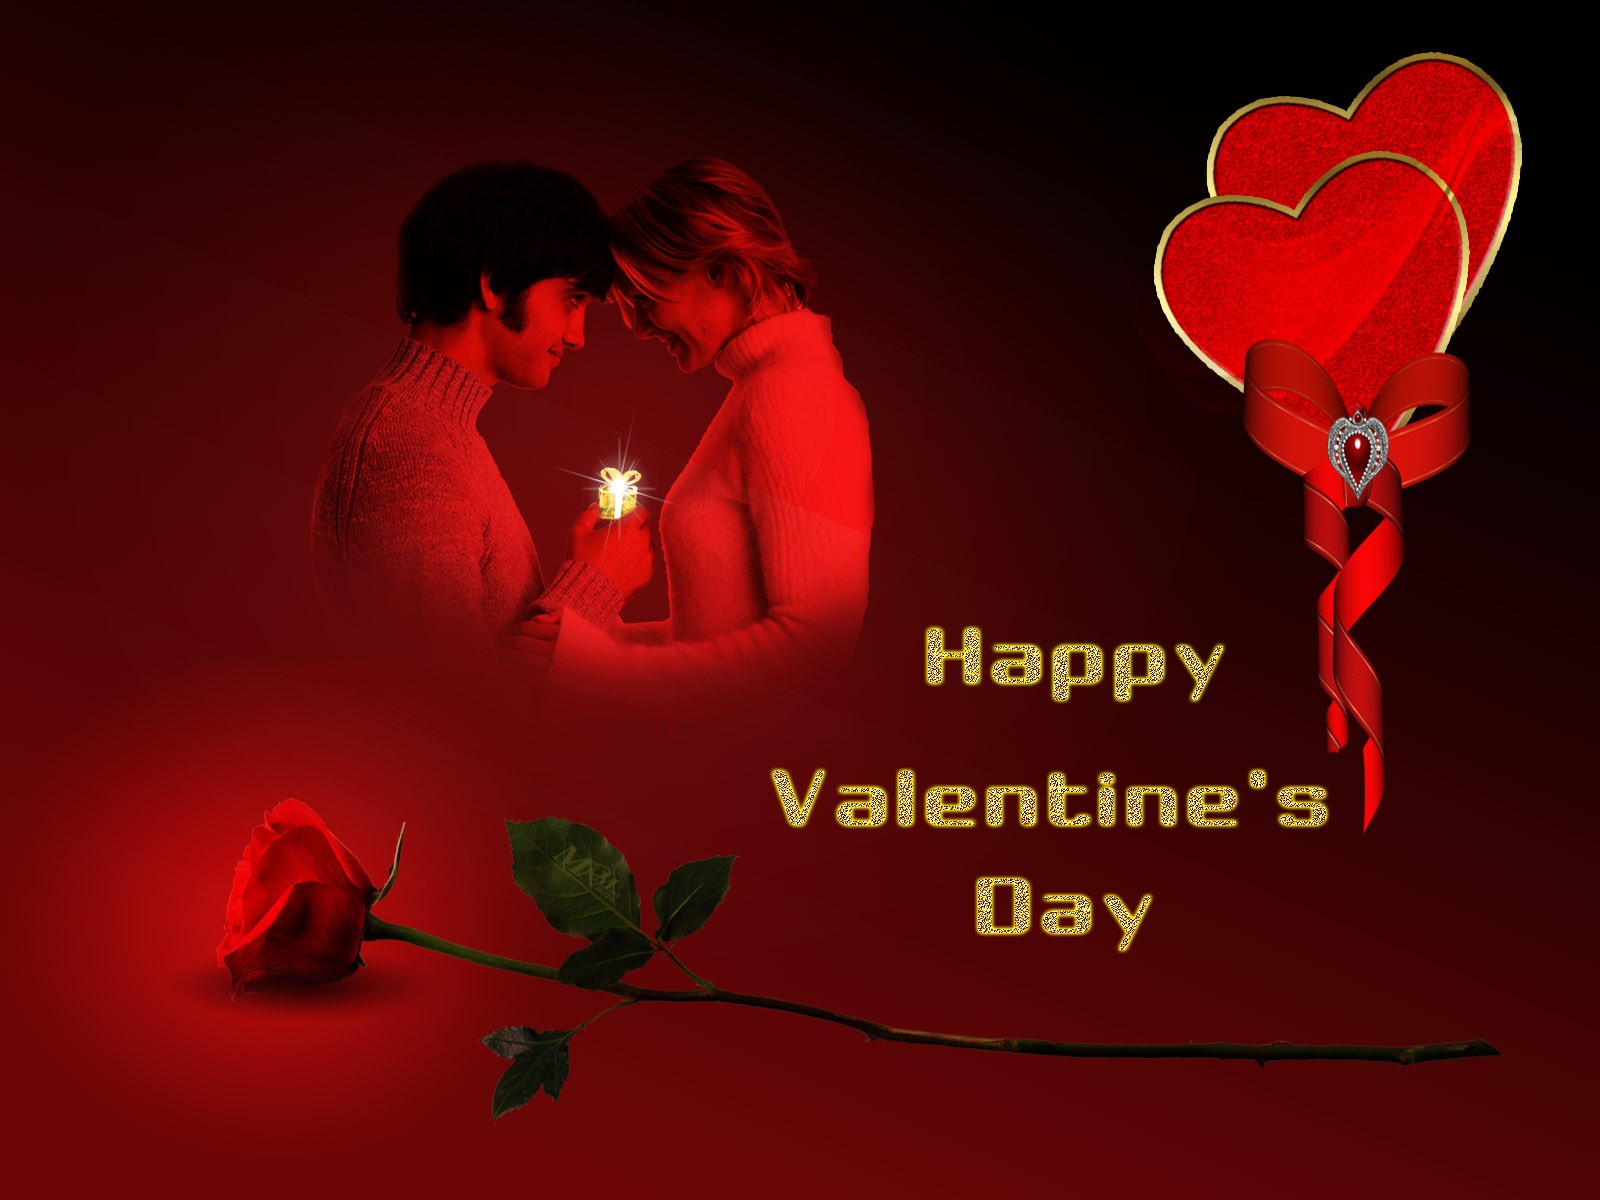 Couple-in-Love-Happy-Valentines-Day-Wallpaper